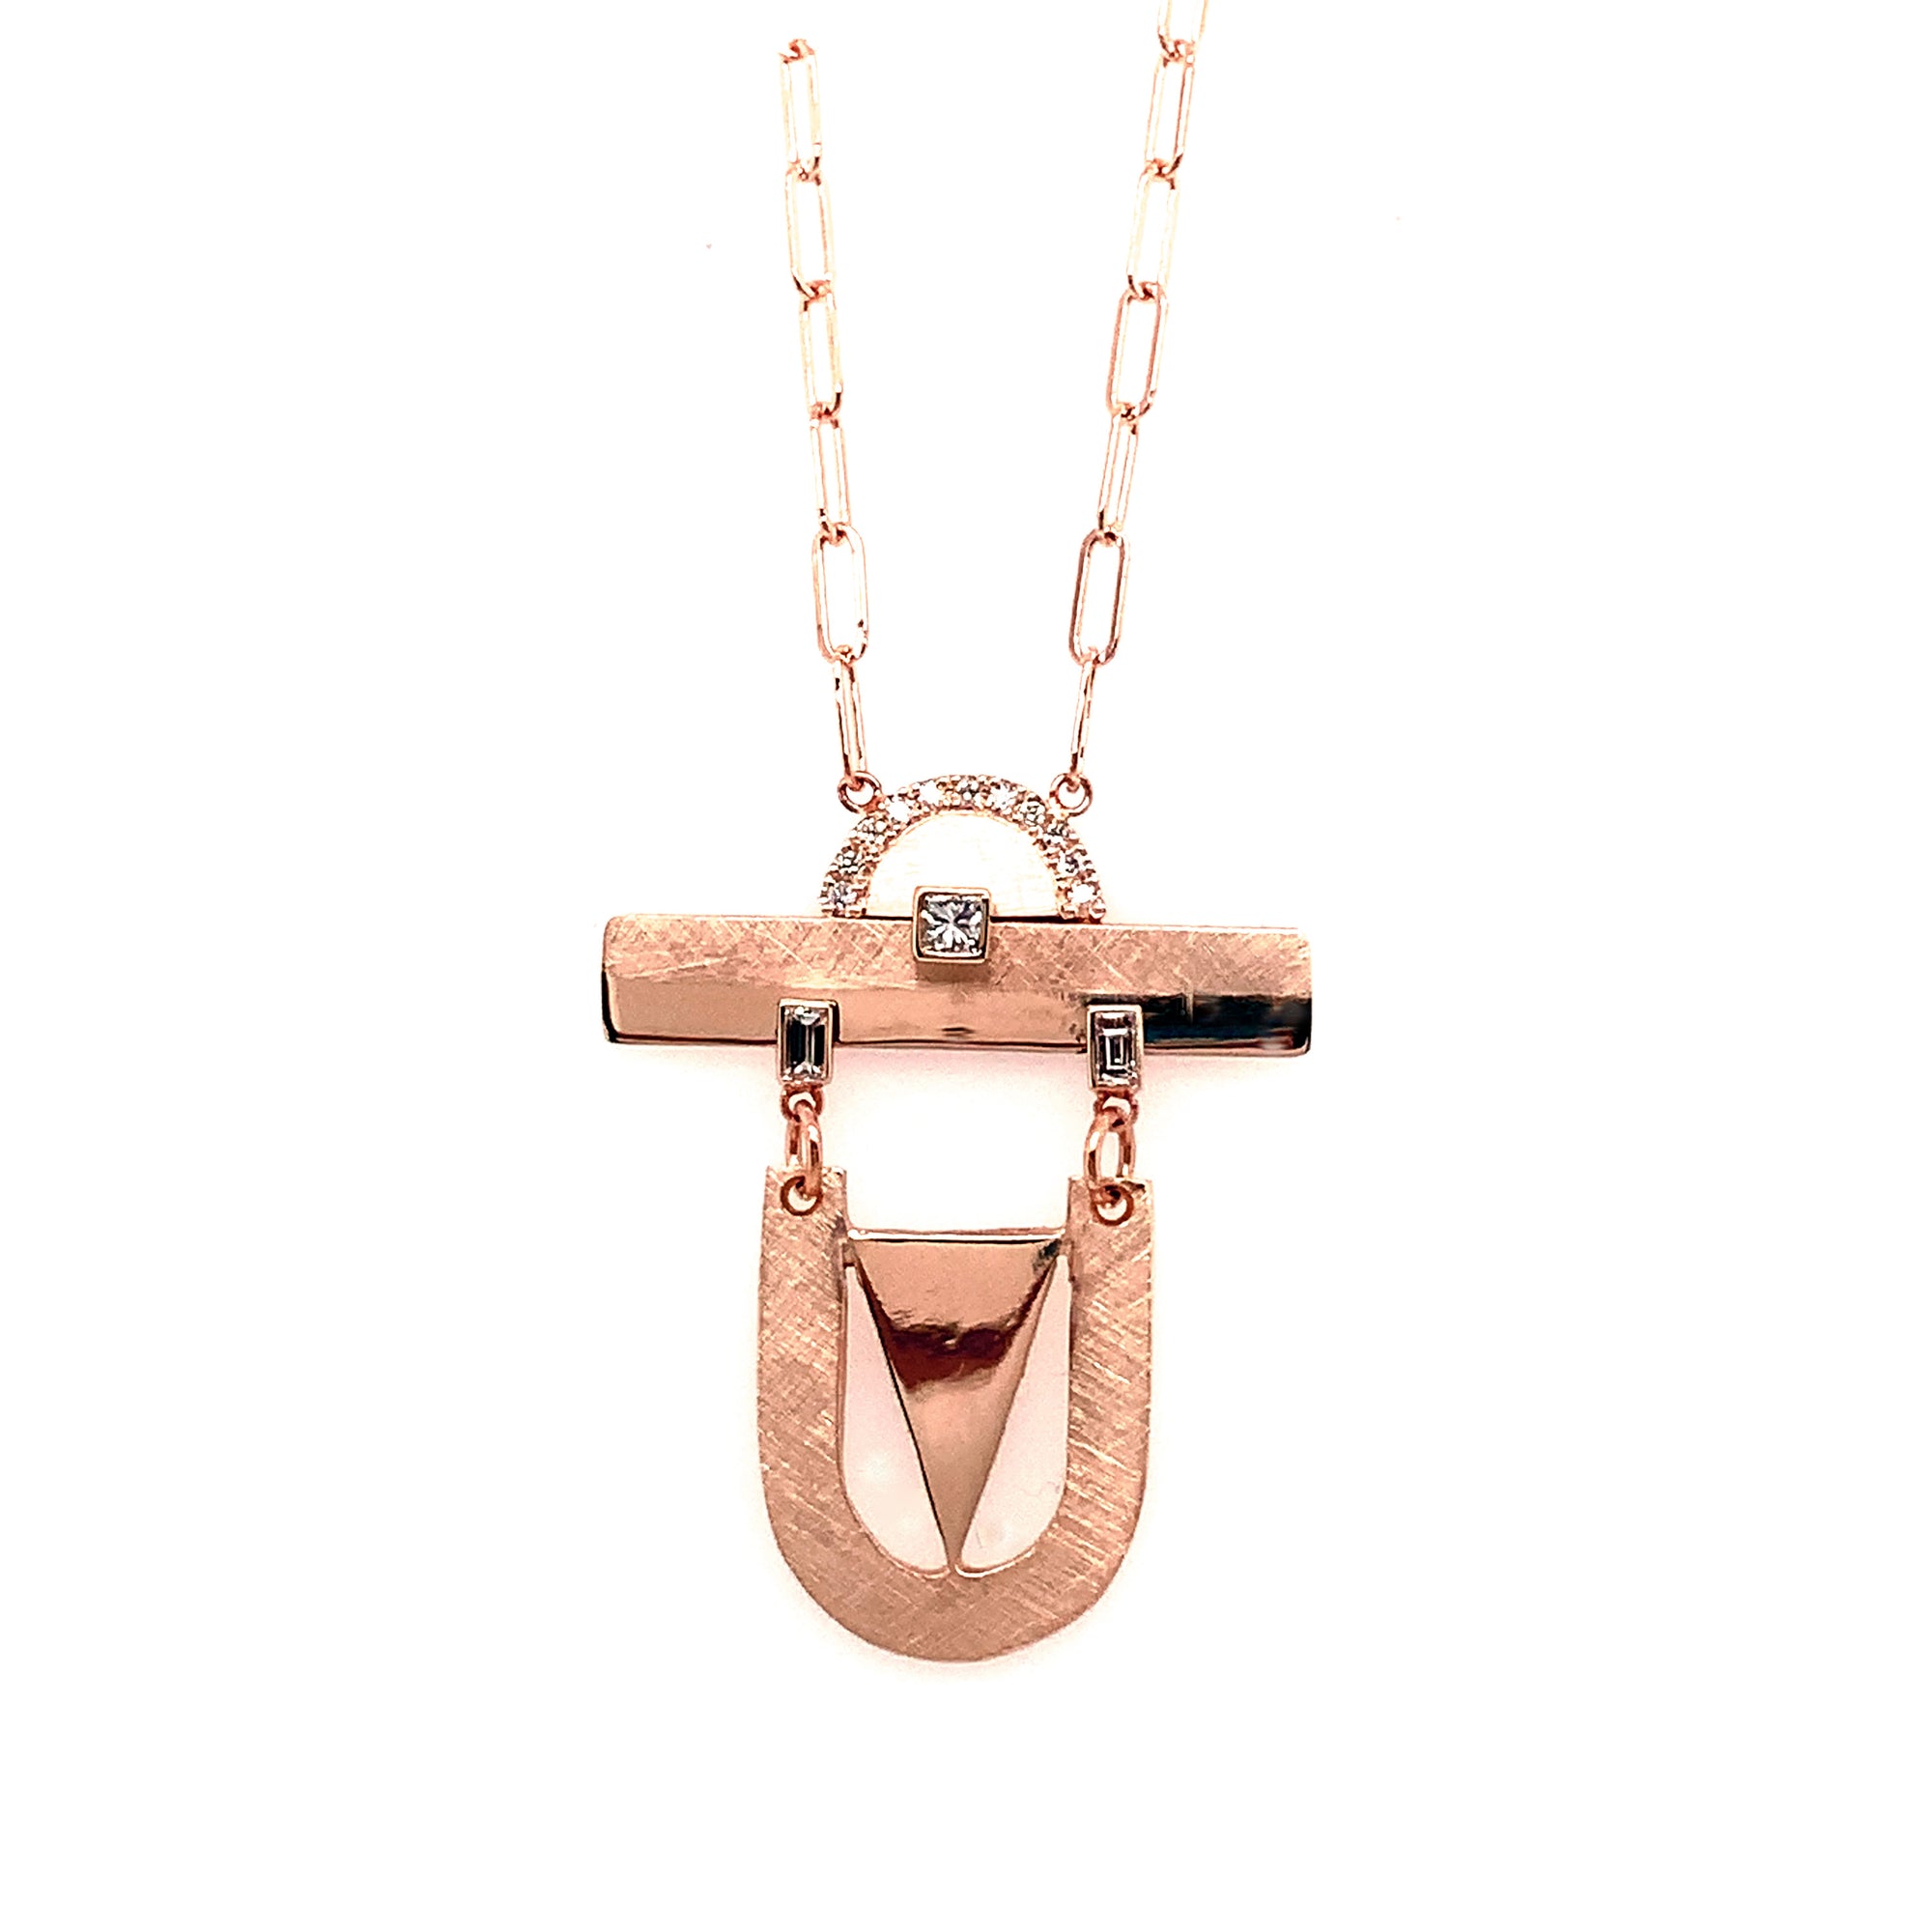 14k rose gold mixed shape hinged necklace with satin and shiny finish and white diamond accents on a 2.0mm link chain